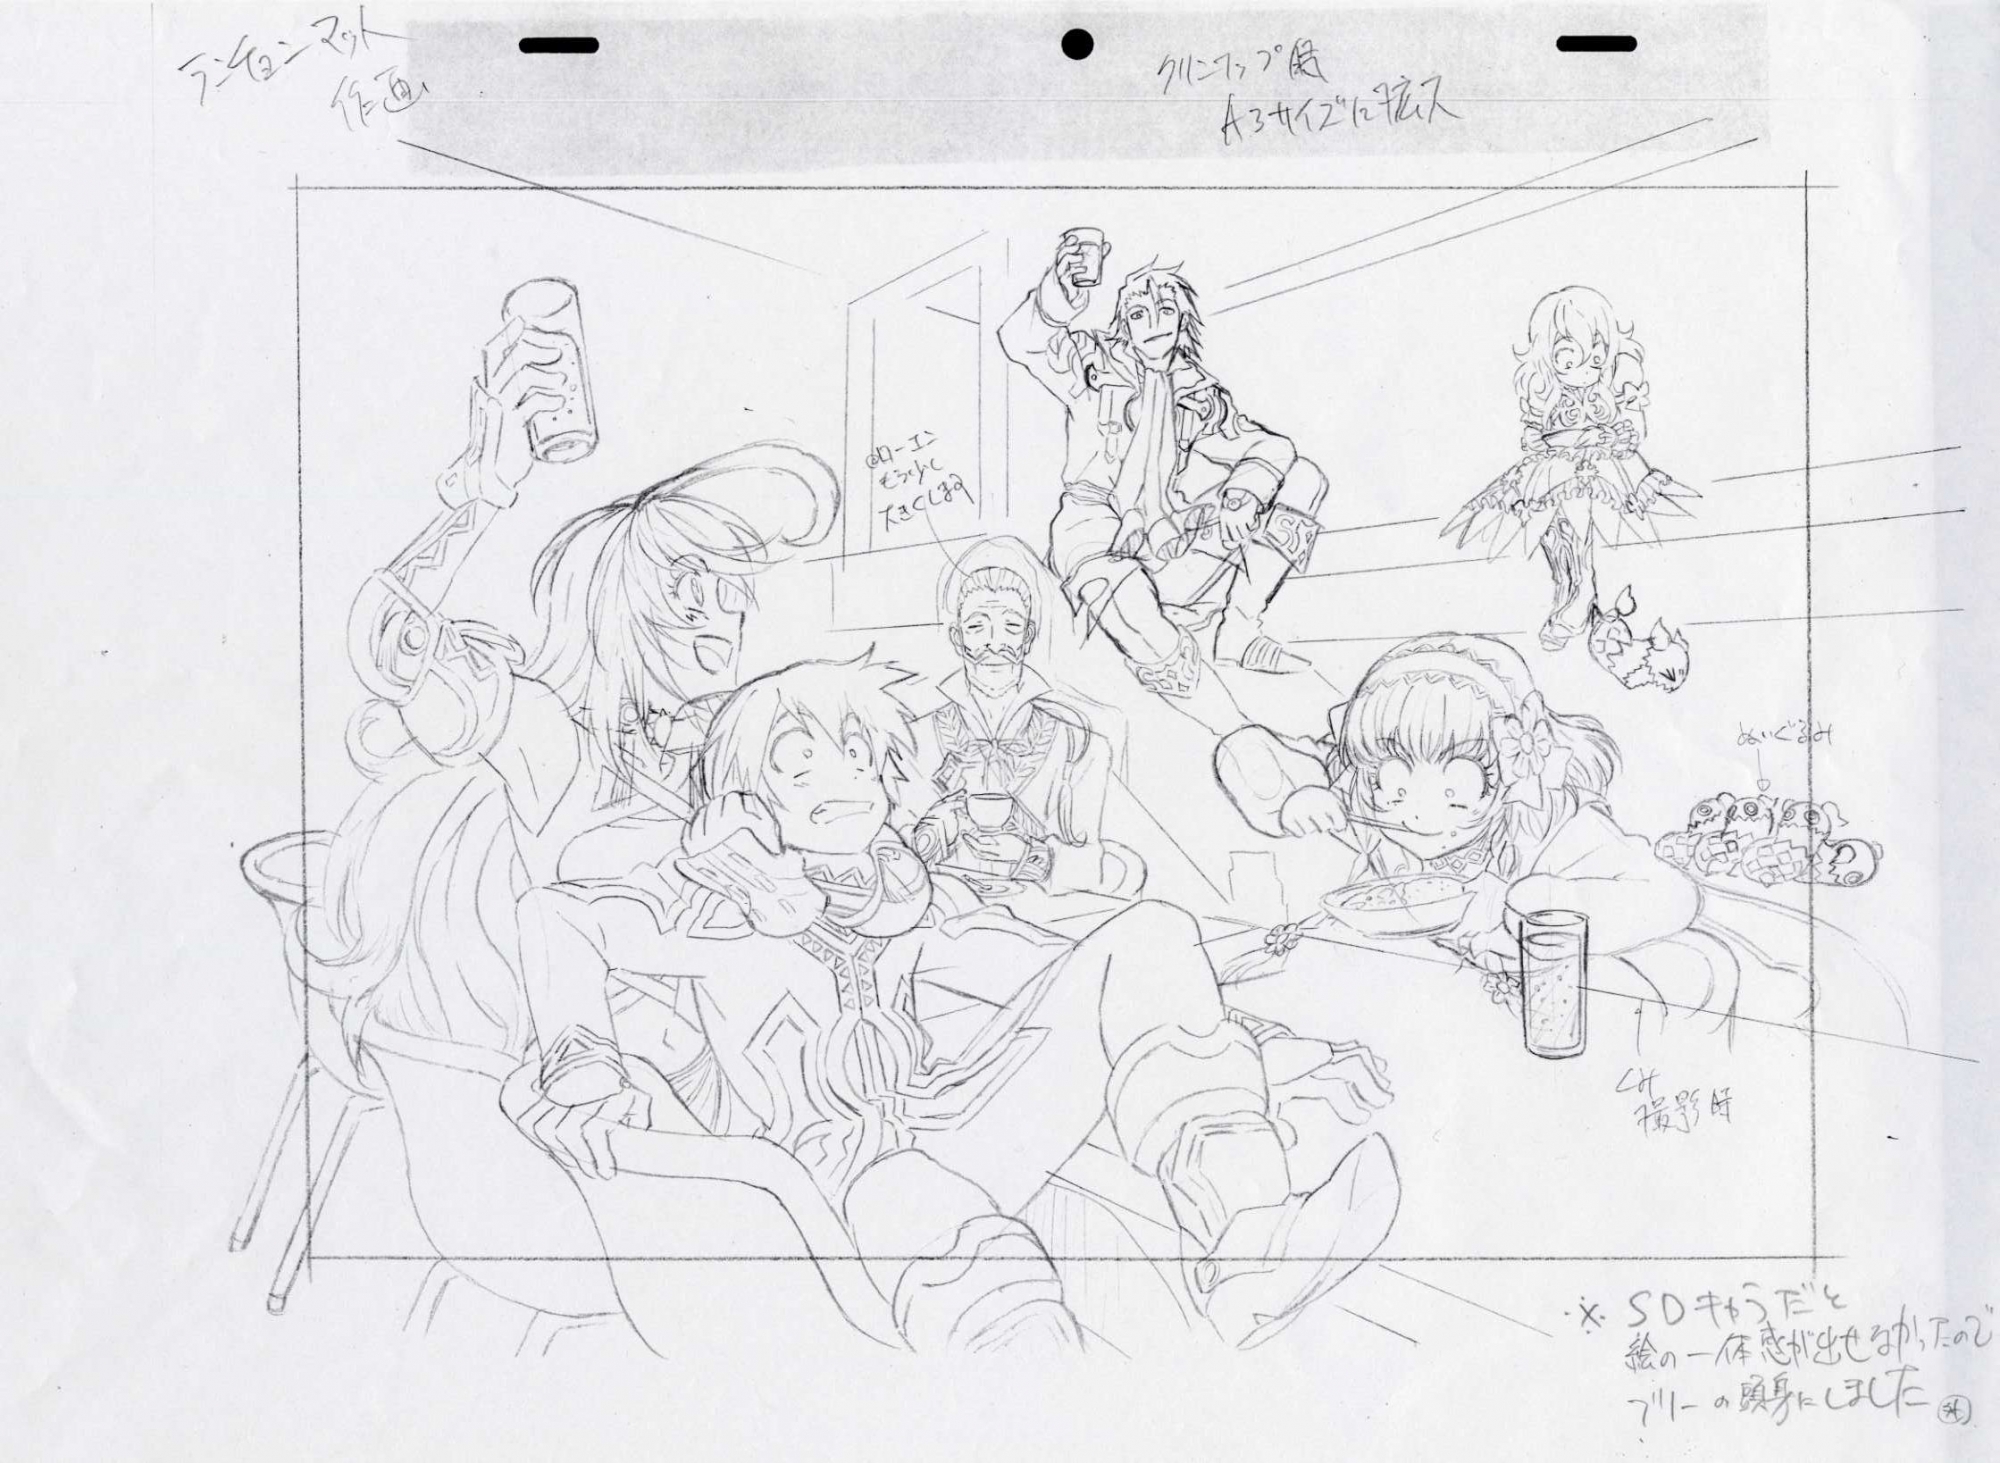 Tales of Cafe Lunch Mat Design
ufotable's design for an upcoming lunch mat for their Tales of Cafe.
